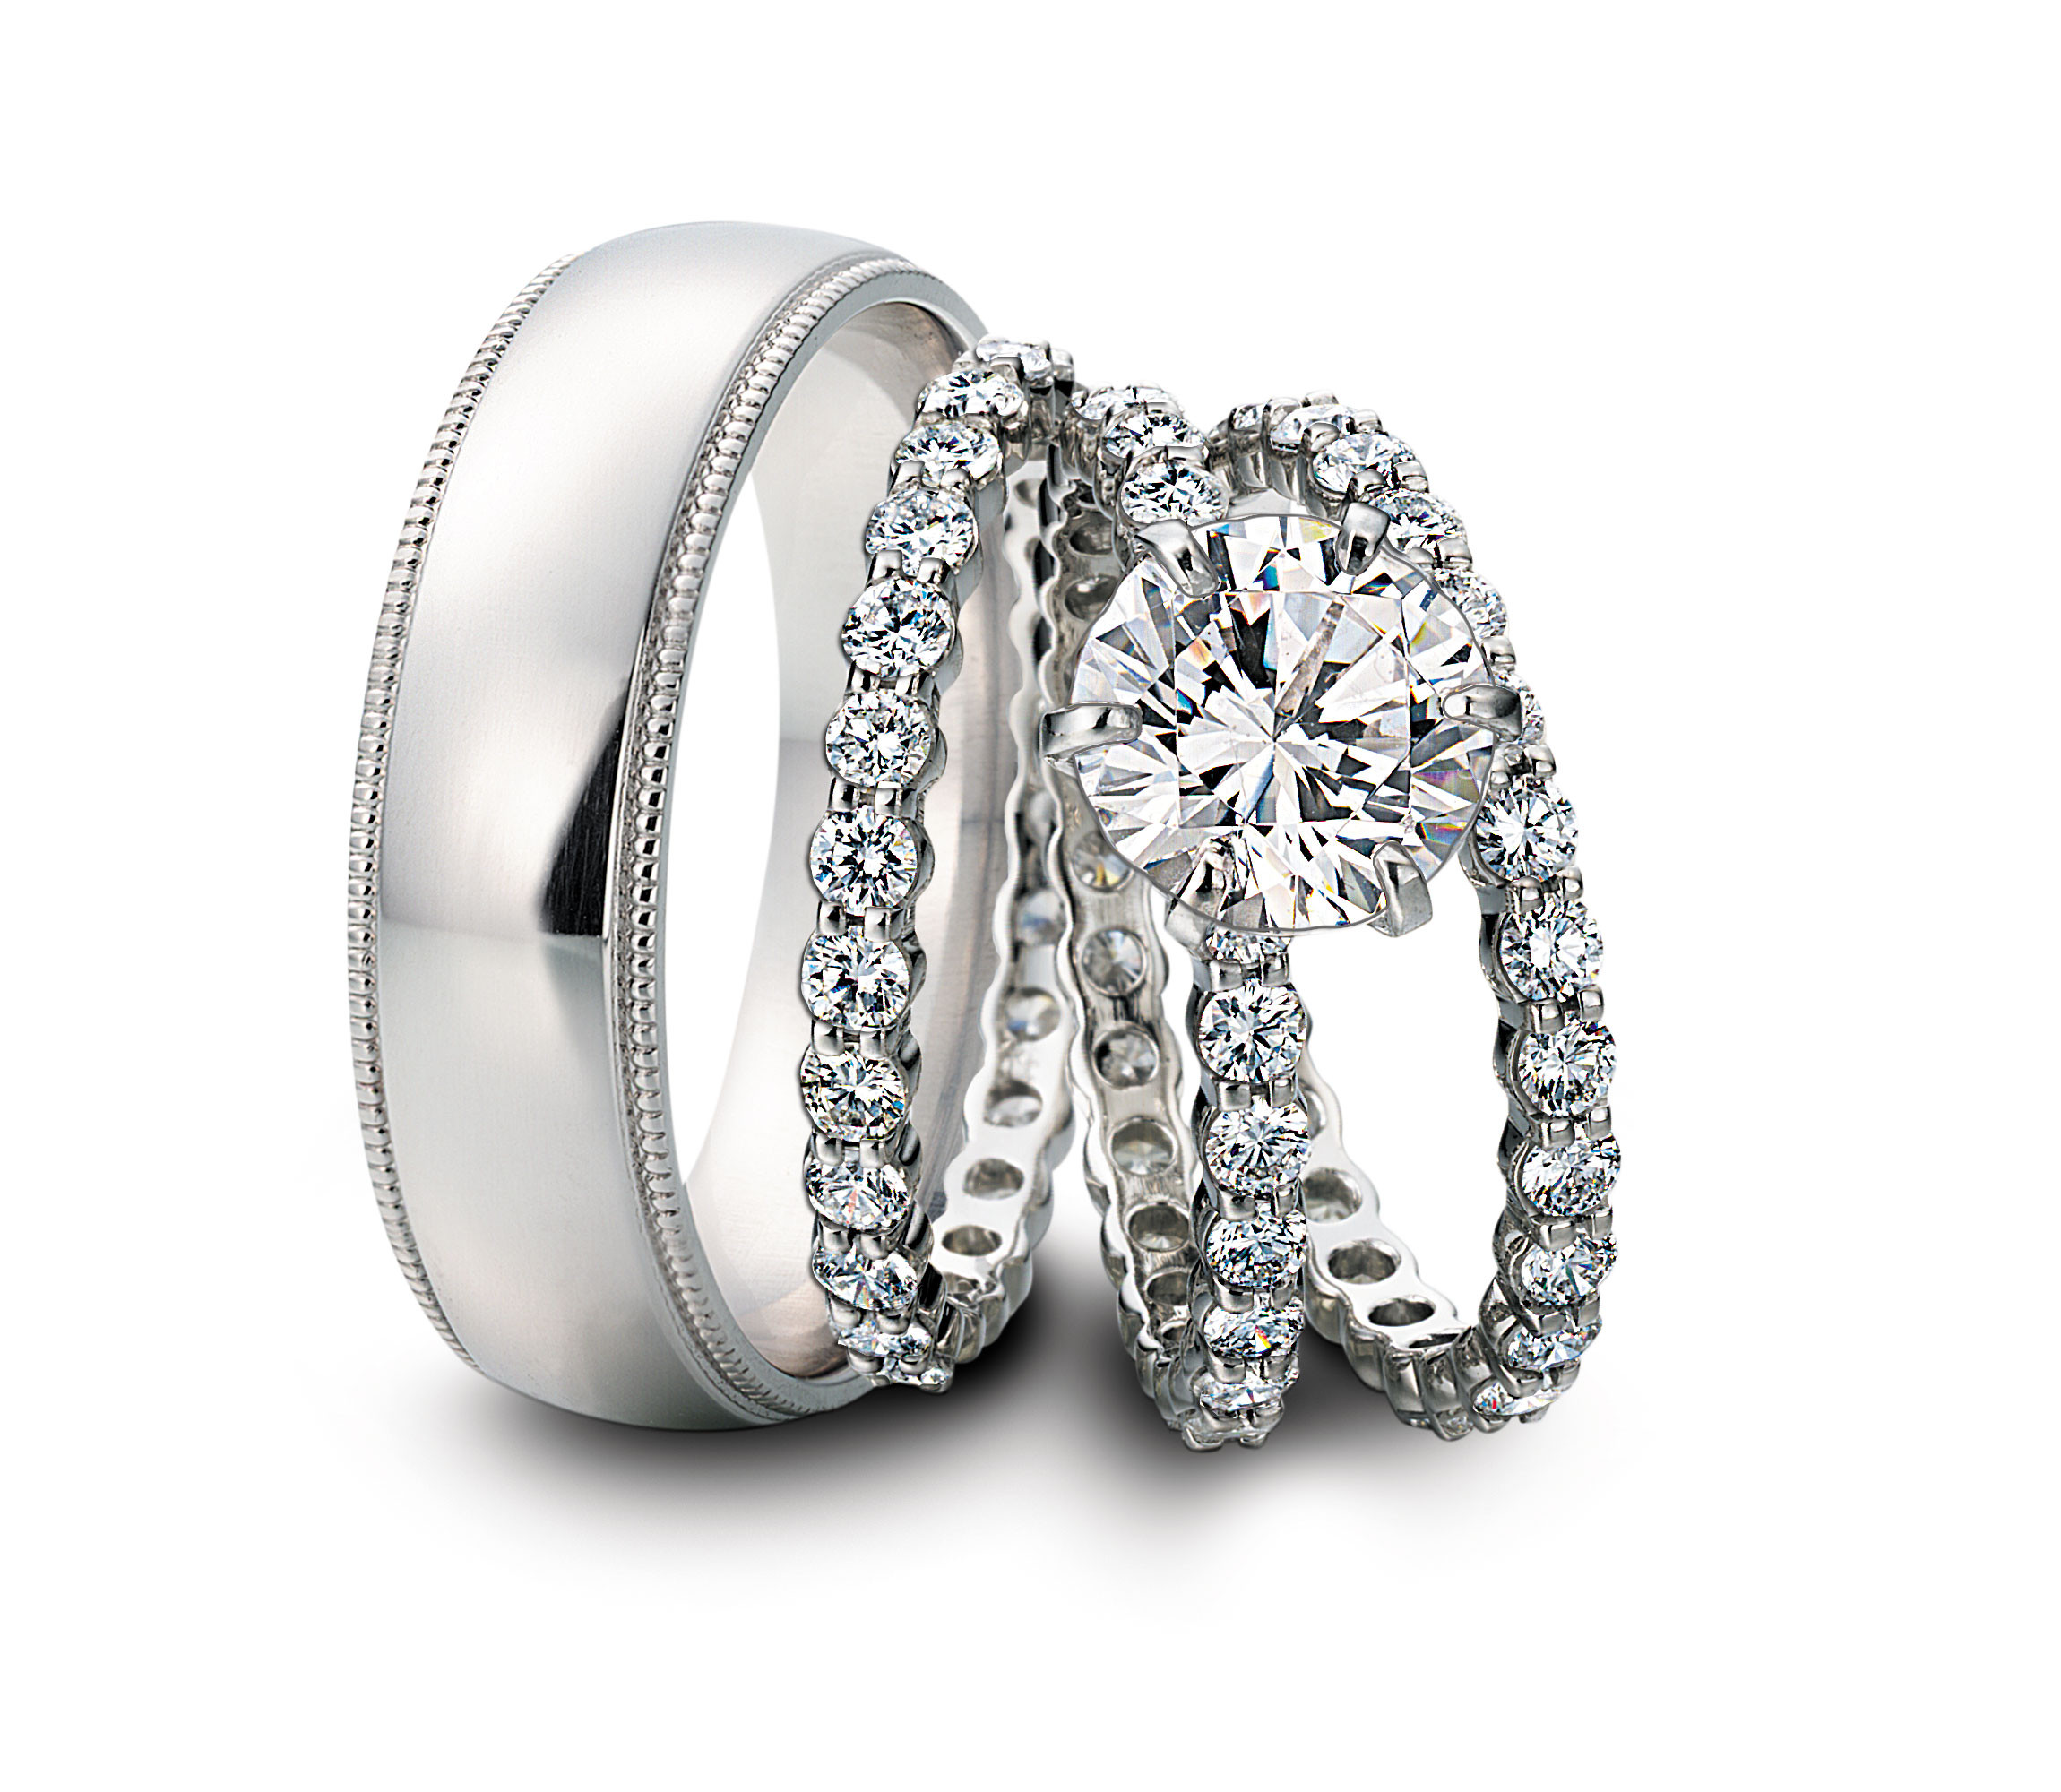 Matching Wedding Band Sets For His And Her
 Should my wedding band be platinum or gold